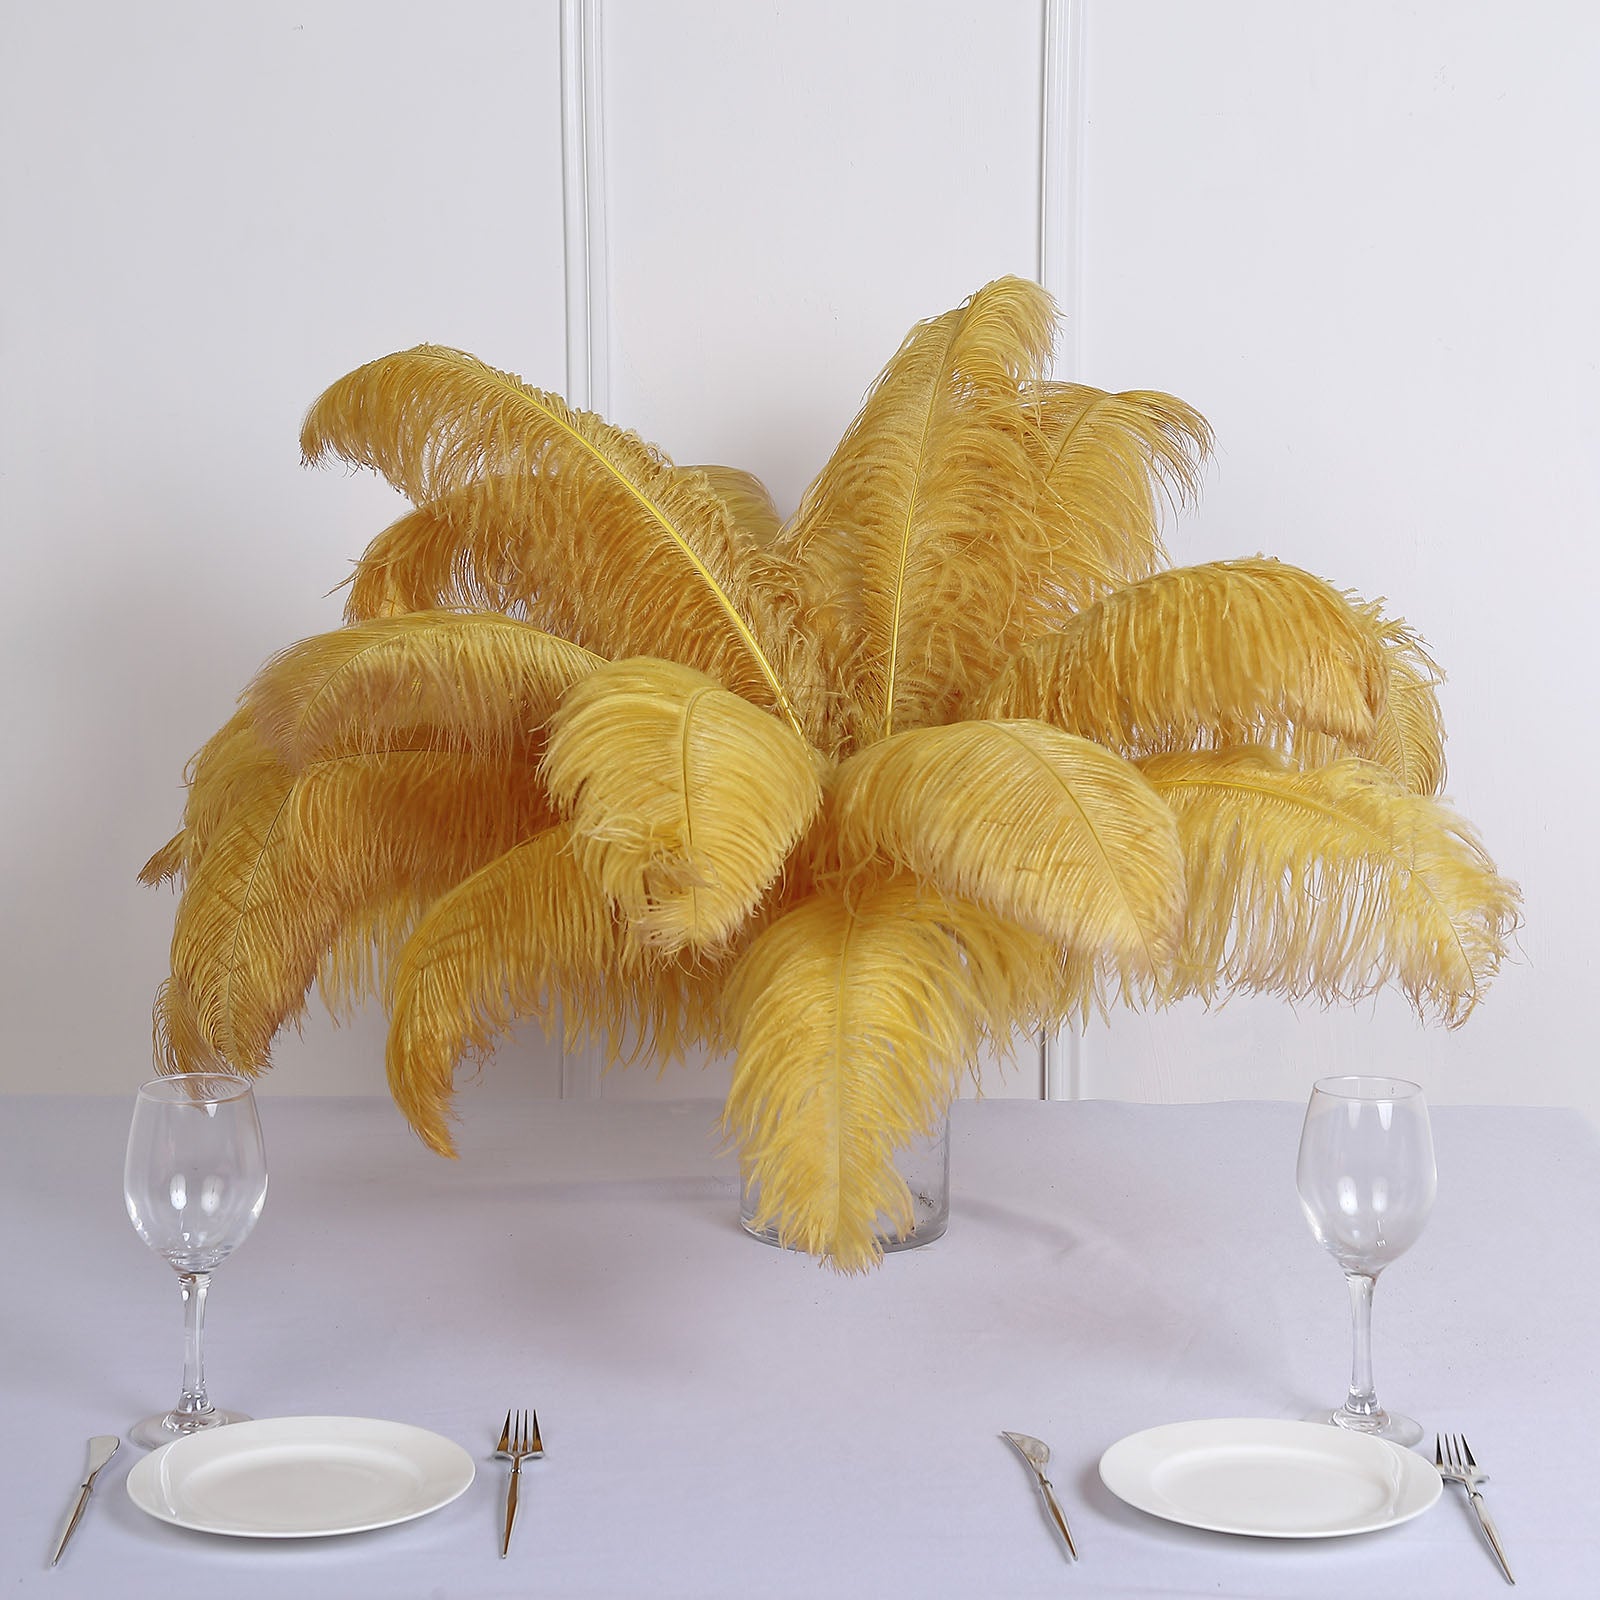 12 Pack Black Natural Plume Ostrich Feathers Centerpiece Filler 24-26   Feather centerpieces, Ostrich feather centerpieces, Centerpiece filler